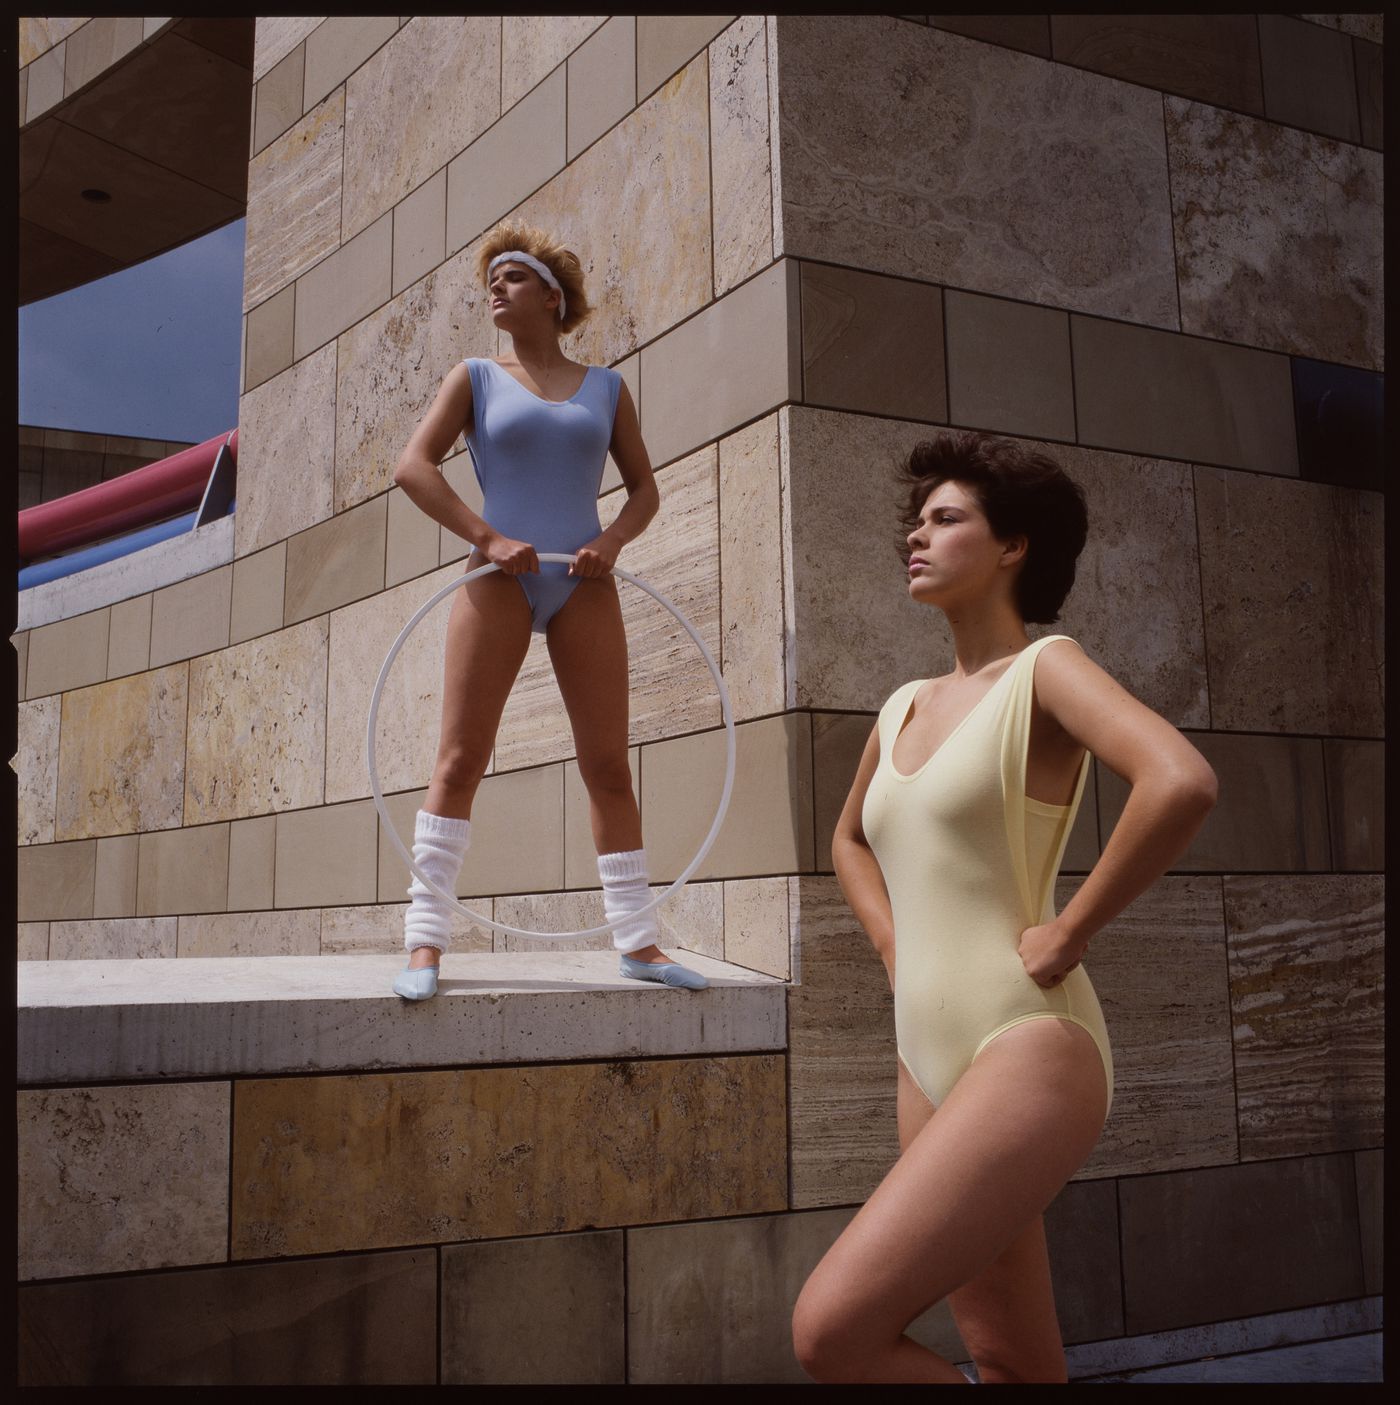 View of Staatsgalerie with fashion models, Stuttgart, Germany